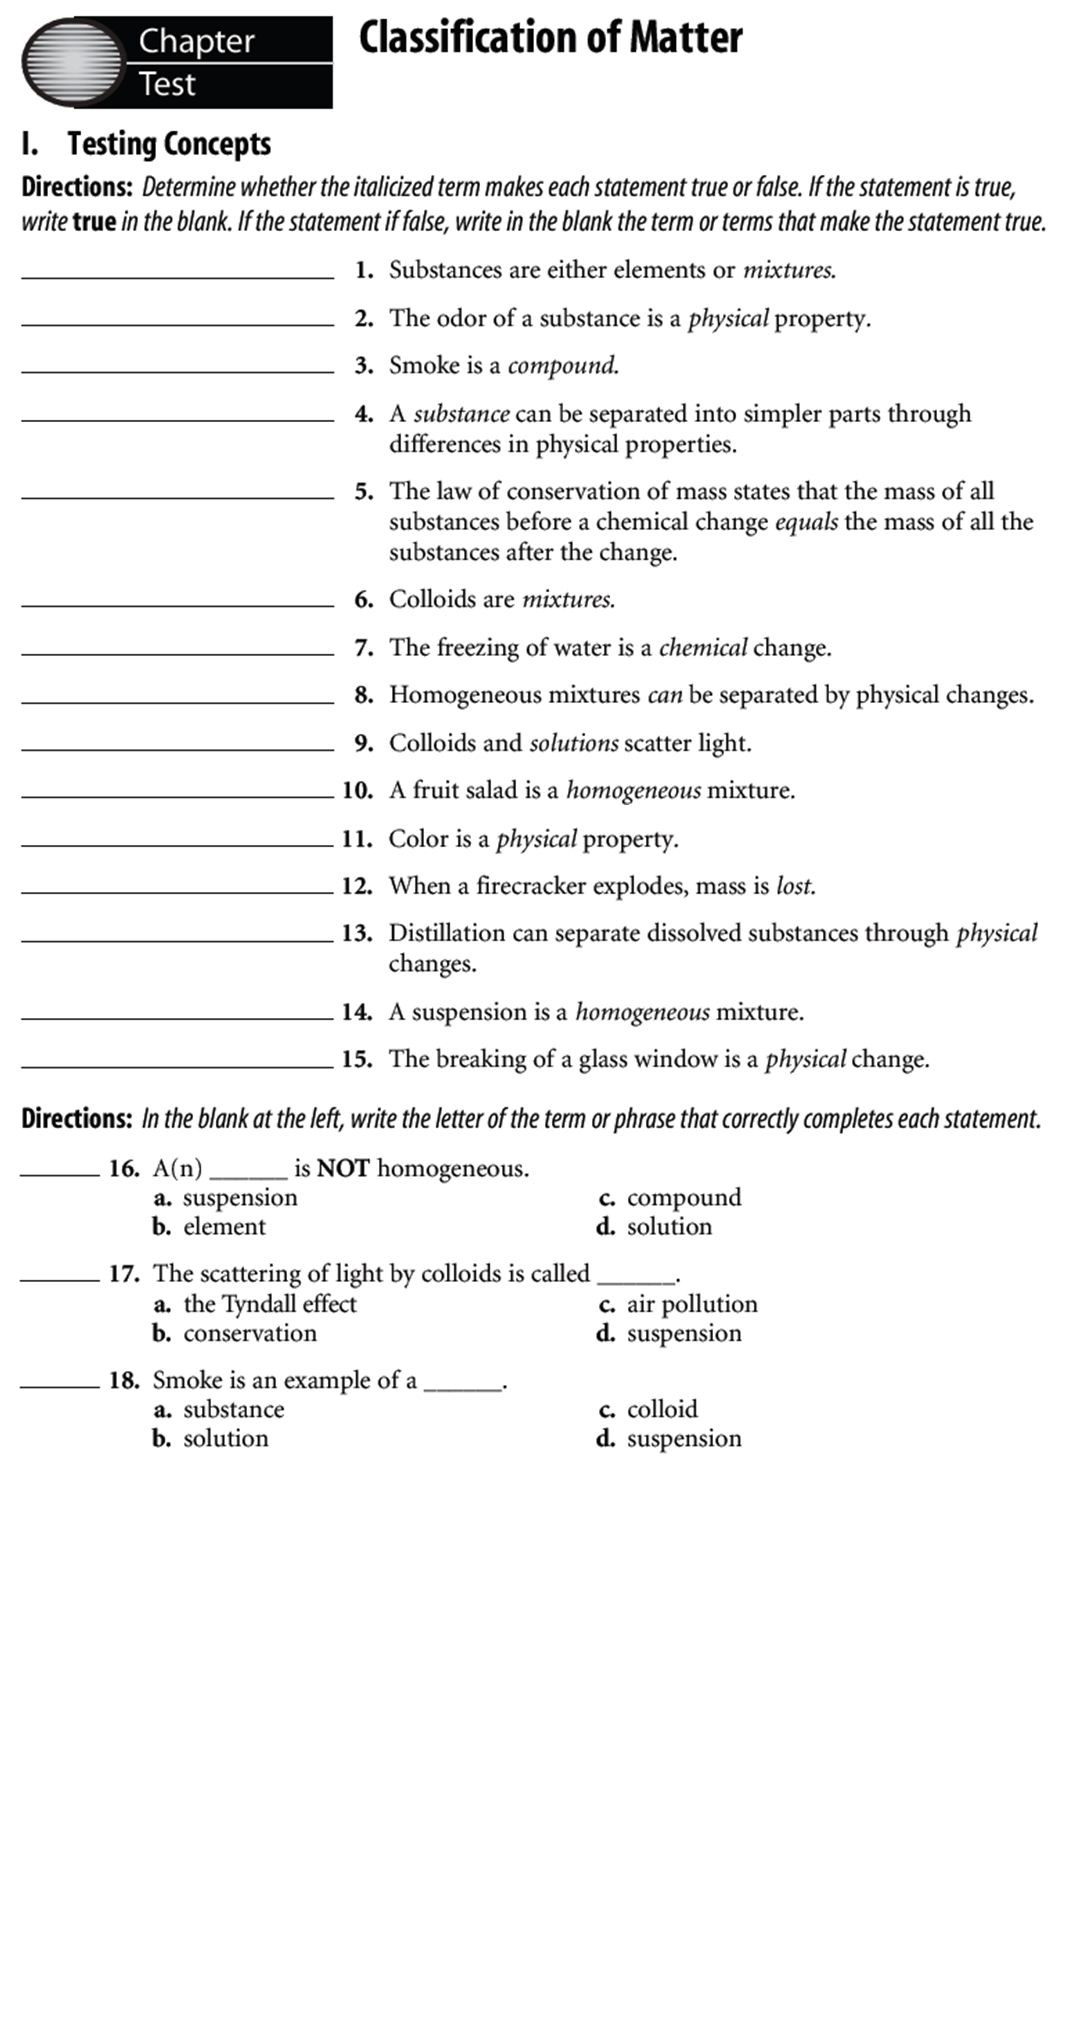 Classifying Matter Worksheet Answers Classification Of Matter Ppt Video Online